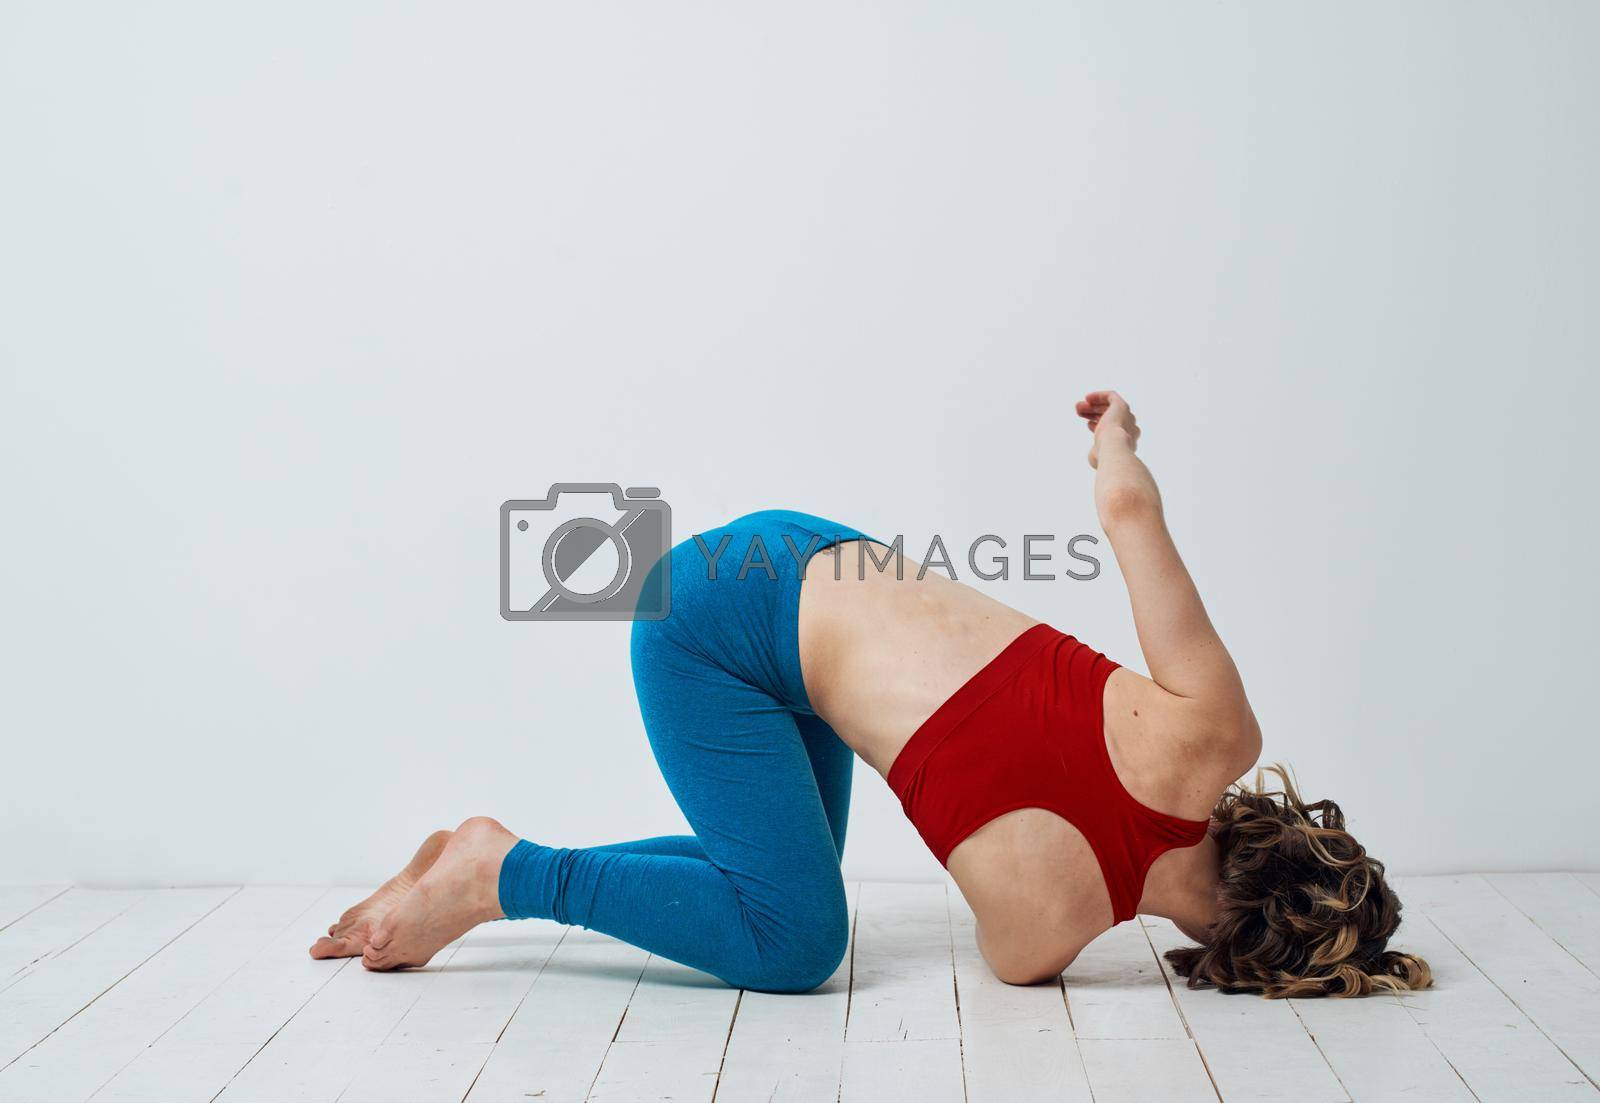 A woman is kneeling on the floor with her arm bent and yoga asana exercises. High quality photo